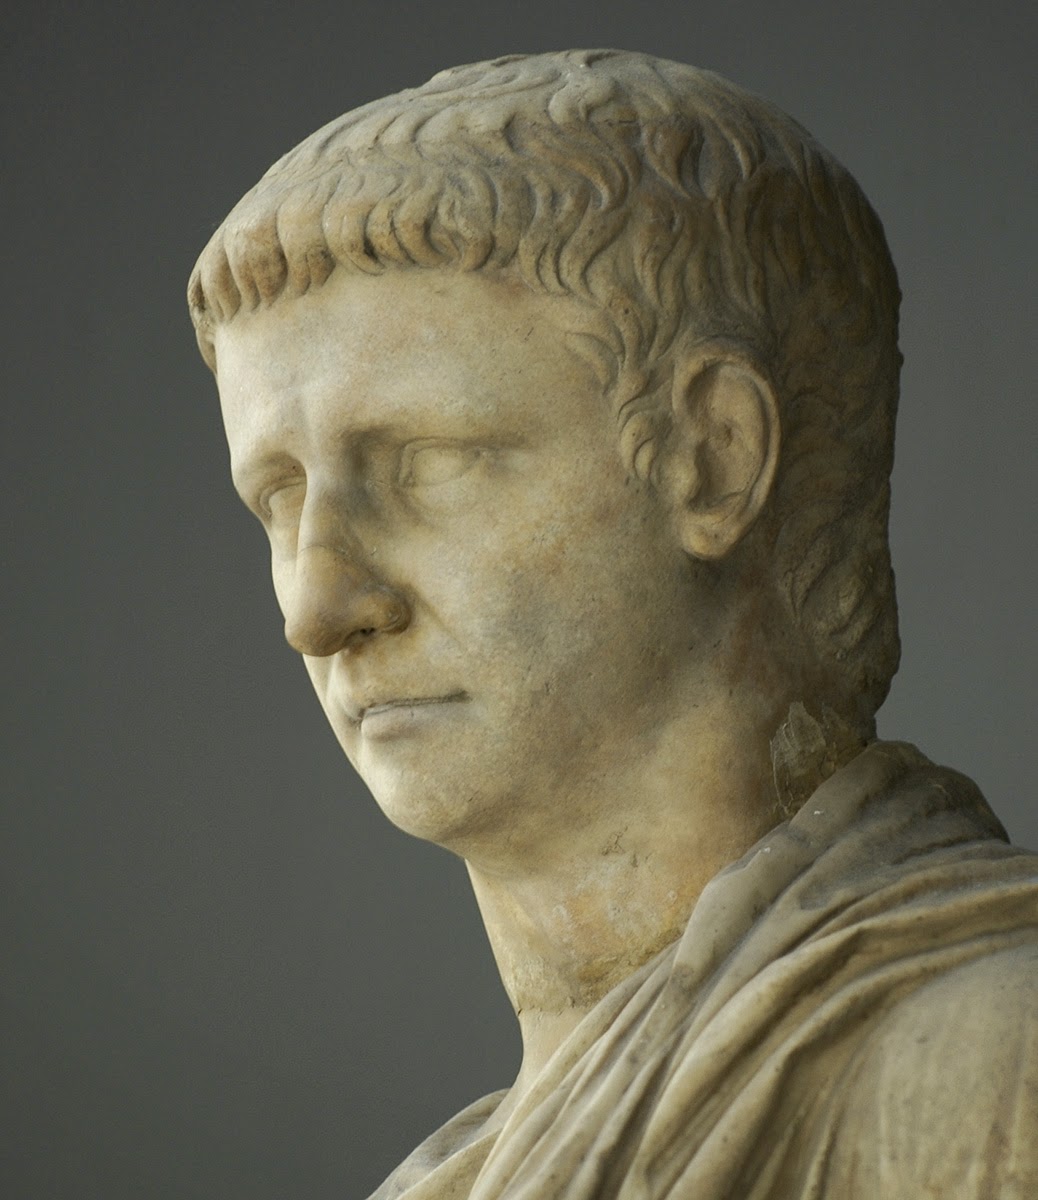 Photo of a marble statue of Emperor Claudius